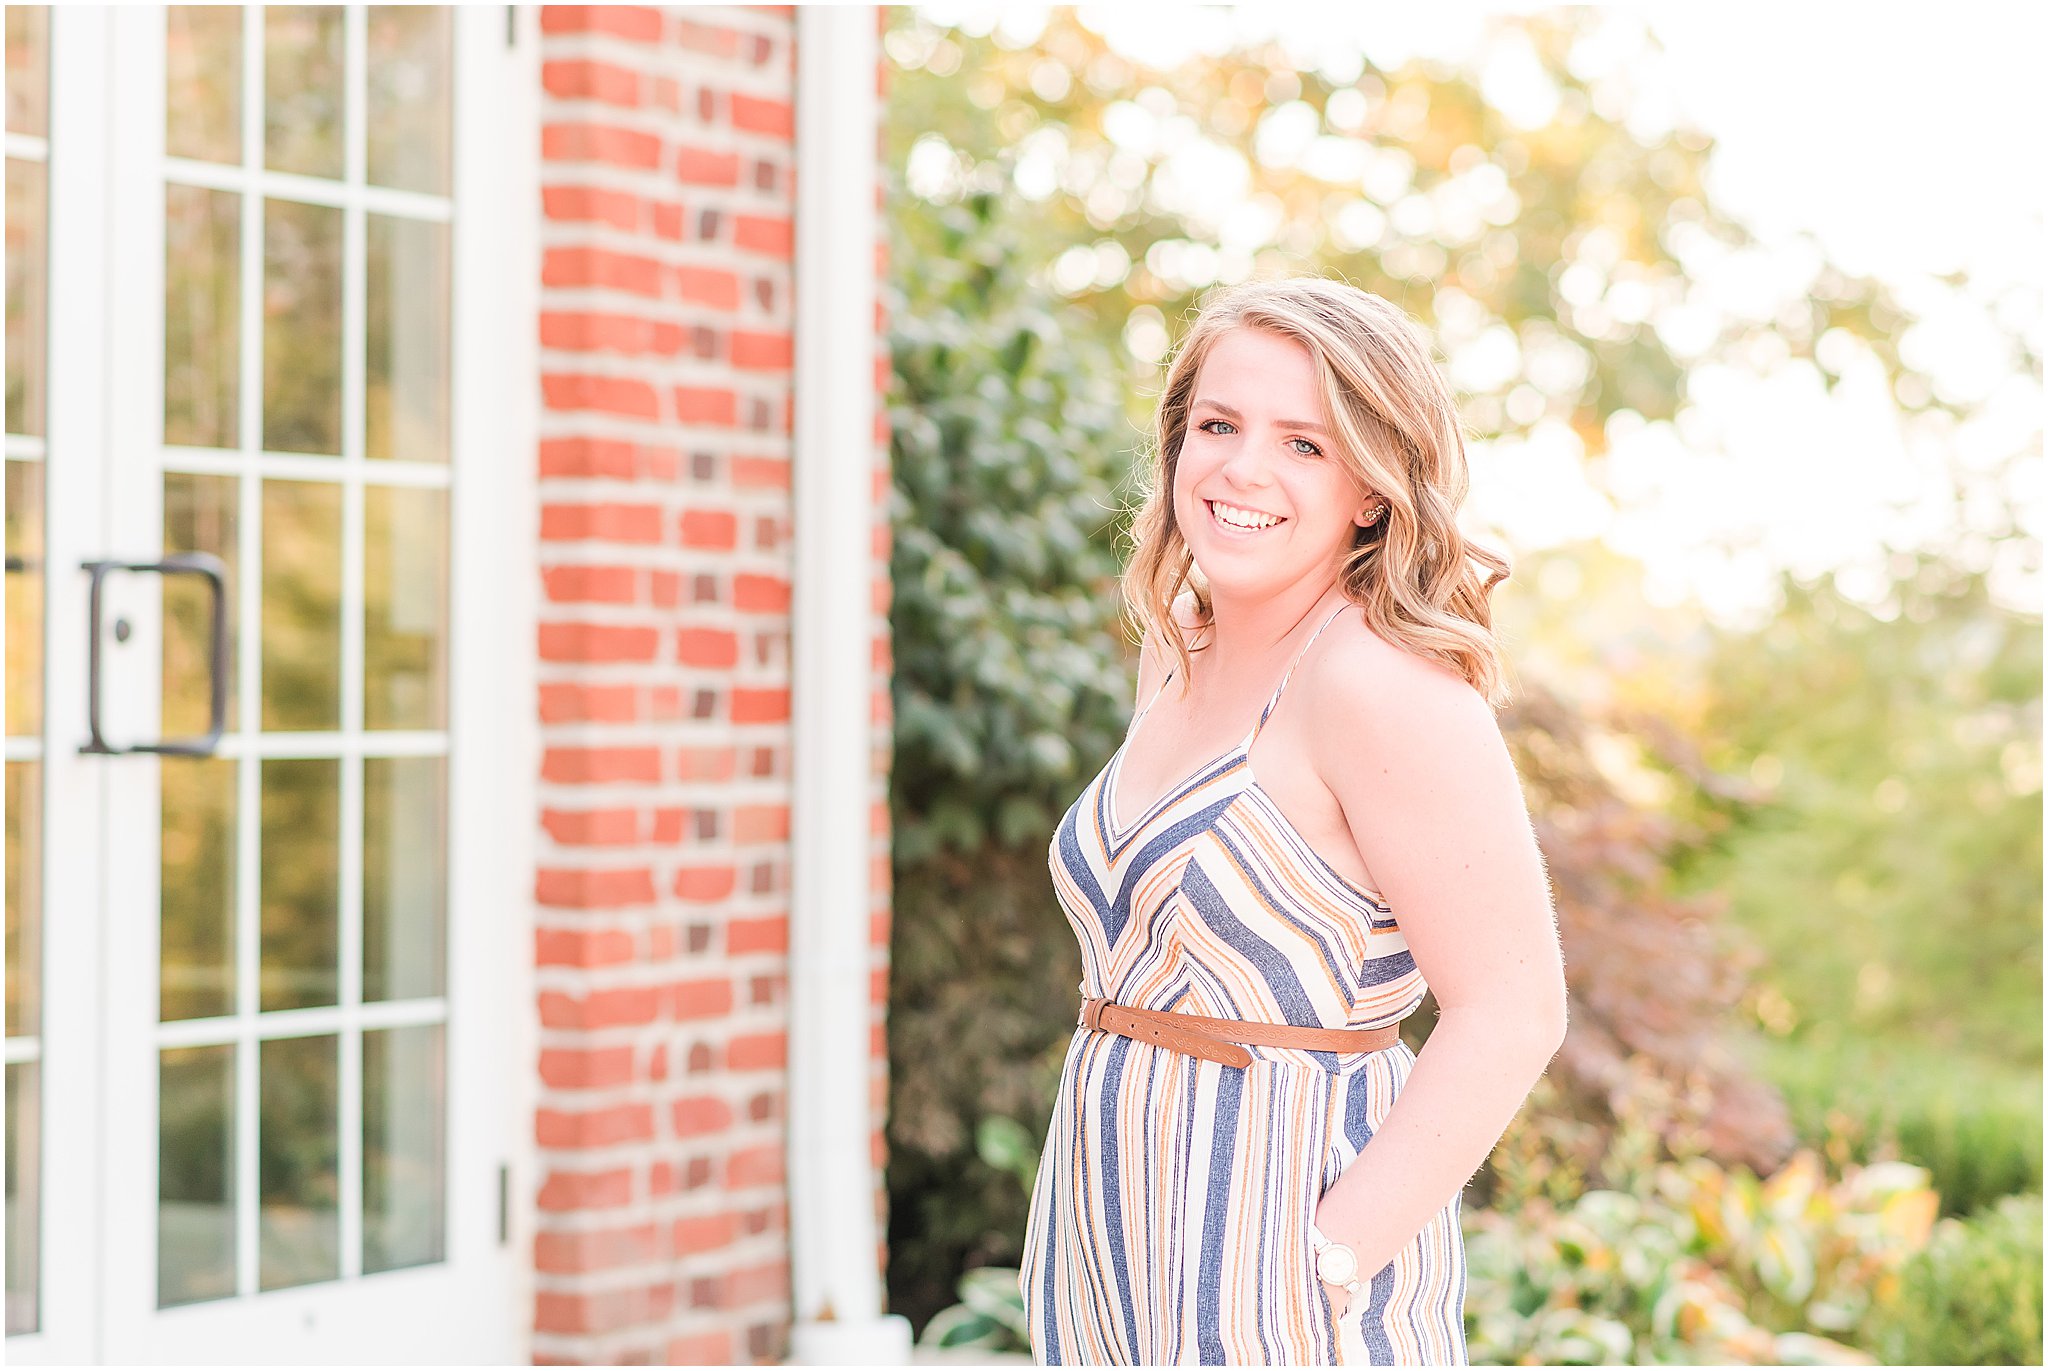 Girl in striped romper smiling at camera during Coxhall Gardens senior session